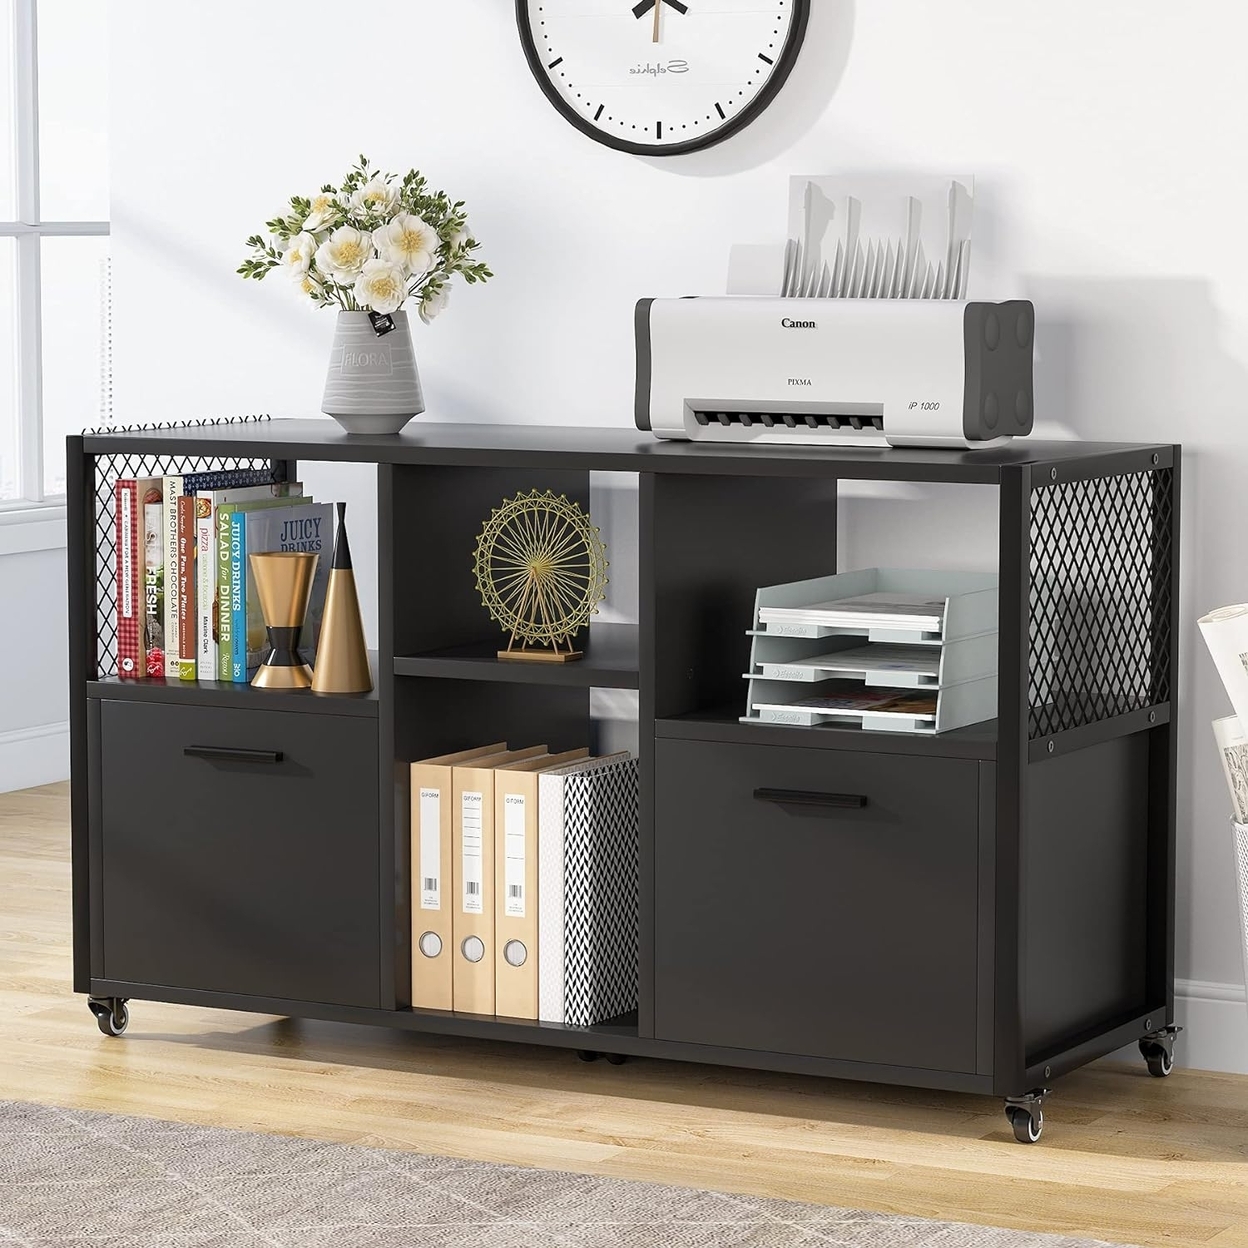 Tribesigns 2 Drawer Wood File Cabinets, Modern Mobile Lateral Filing Cabinet With Open Storage Shelves And Drawer - Black